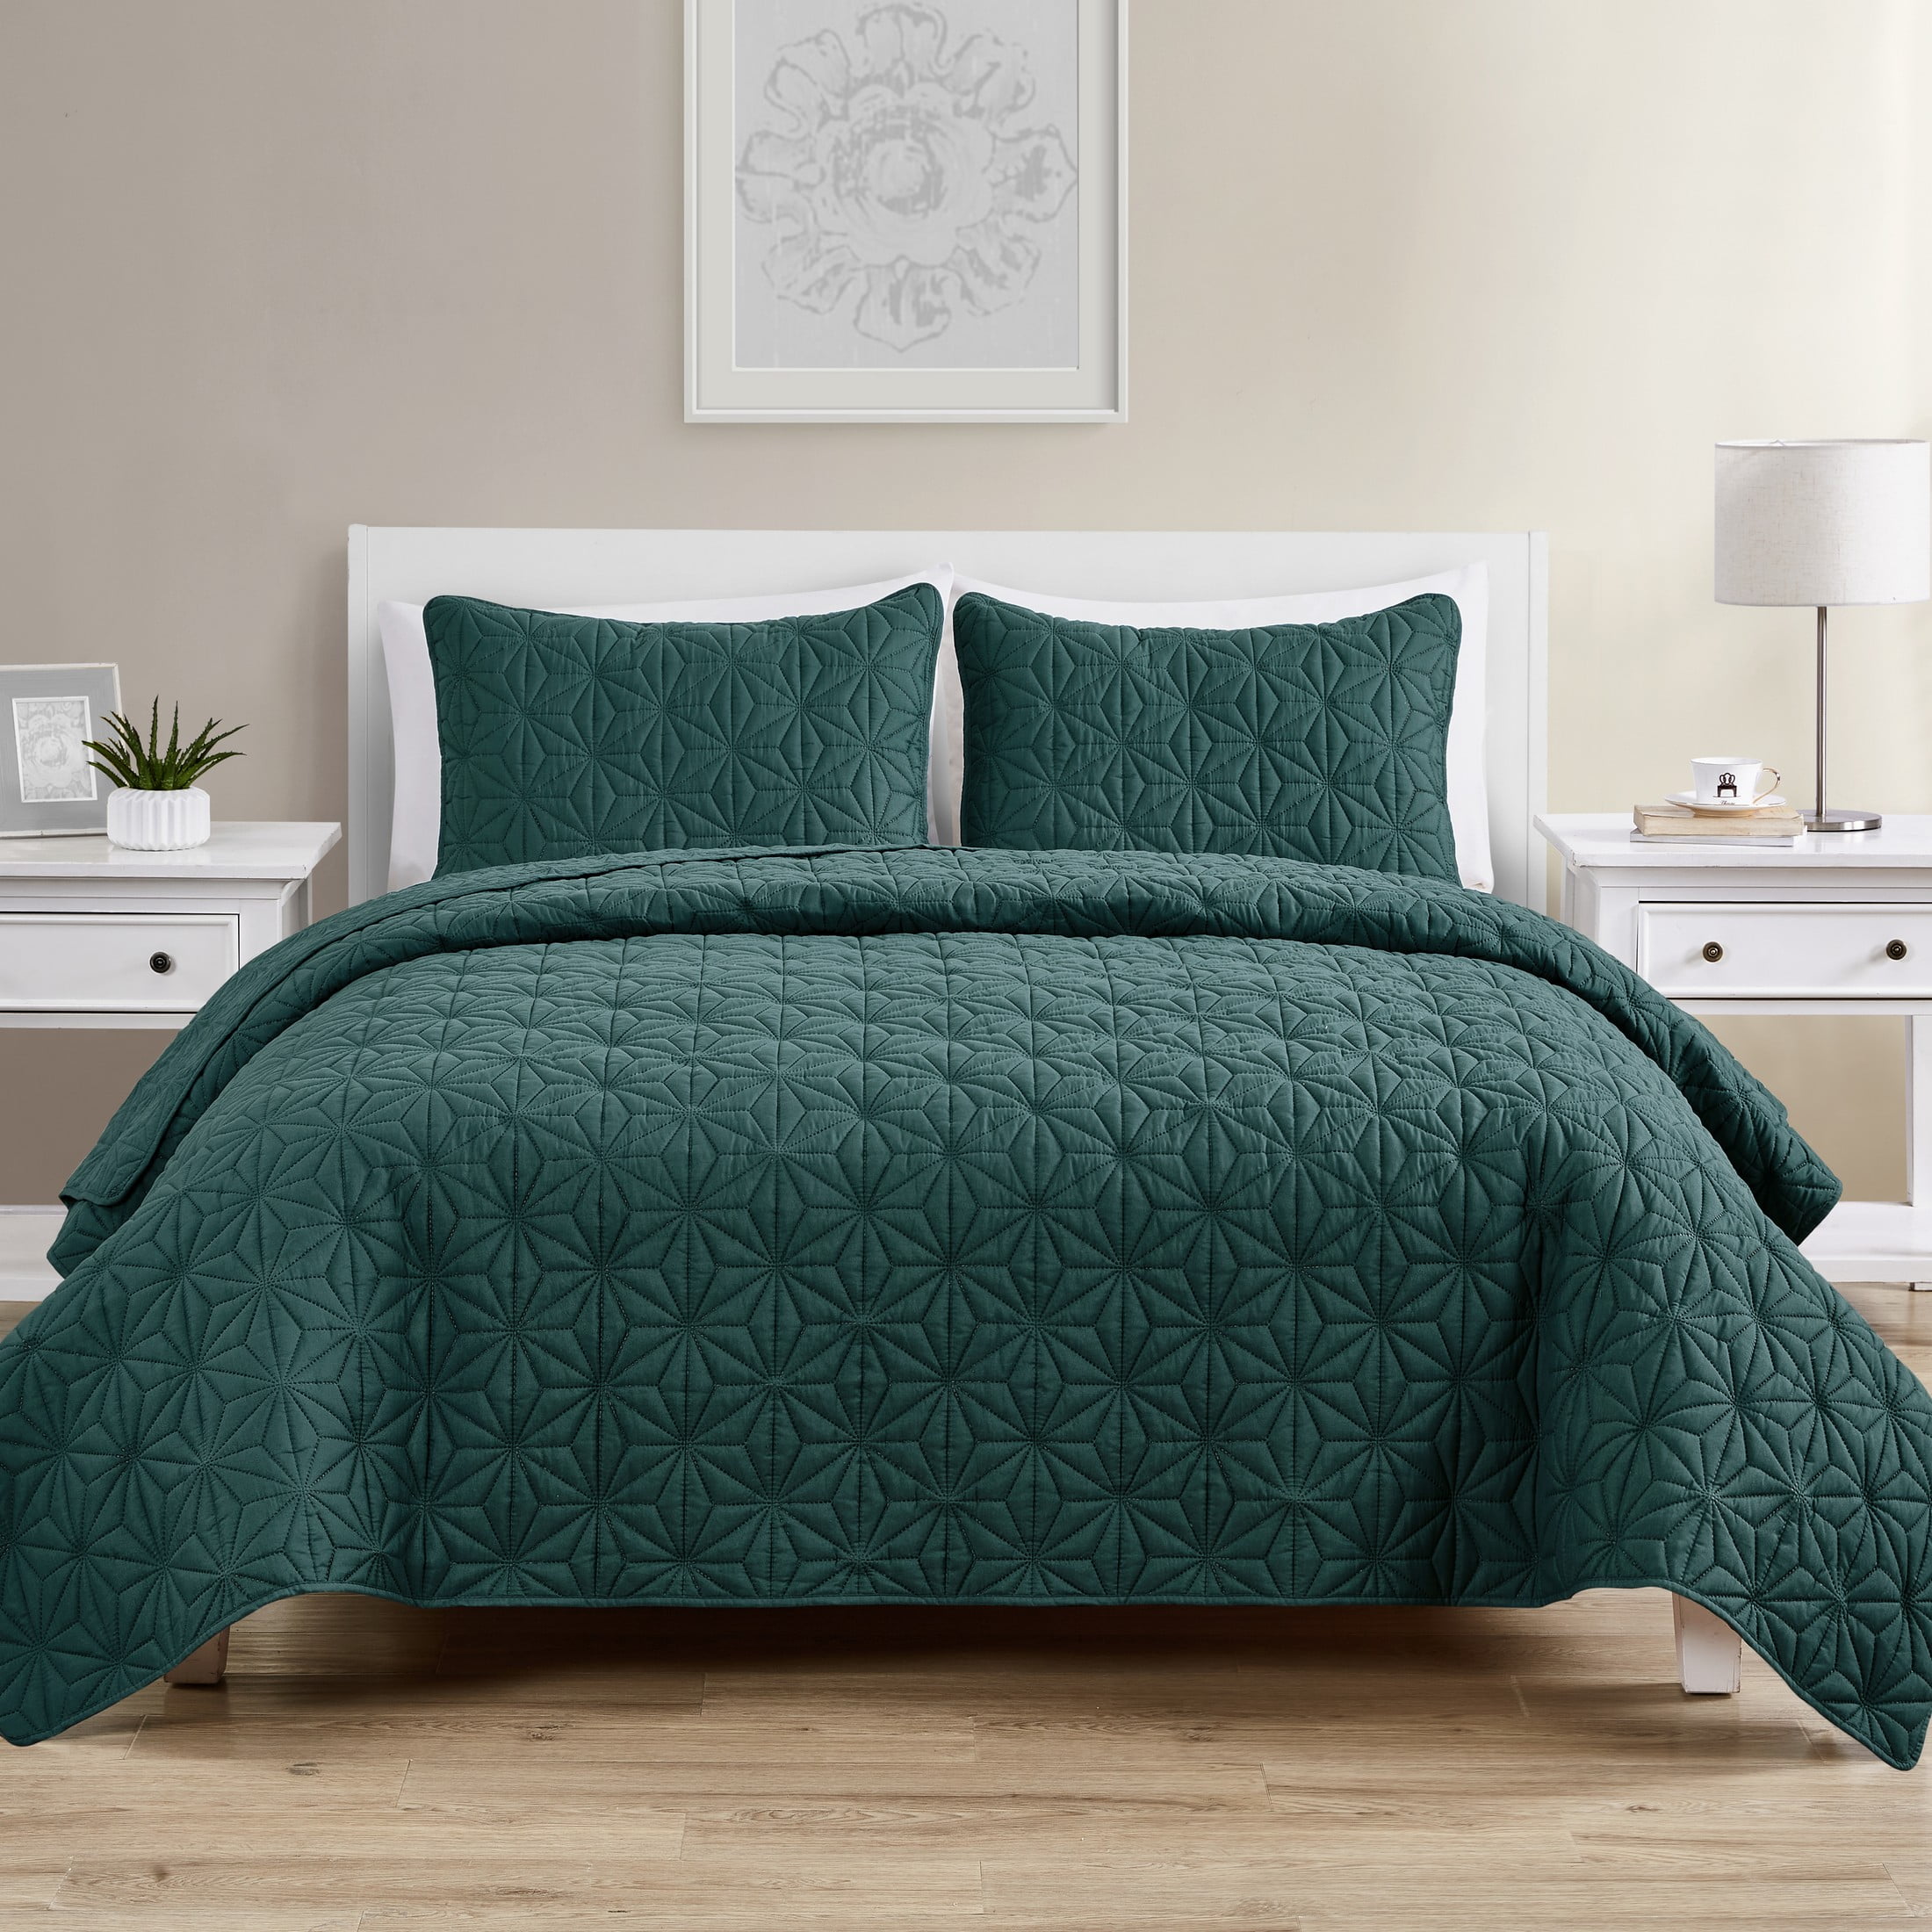 Details about   VCNY Home Nina Bedding Collection Luxury Premium Ultra Soft Quilt Coverlet Comf 